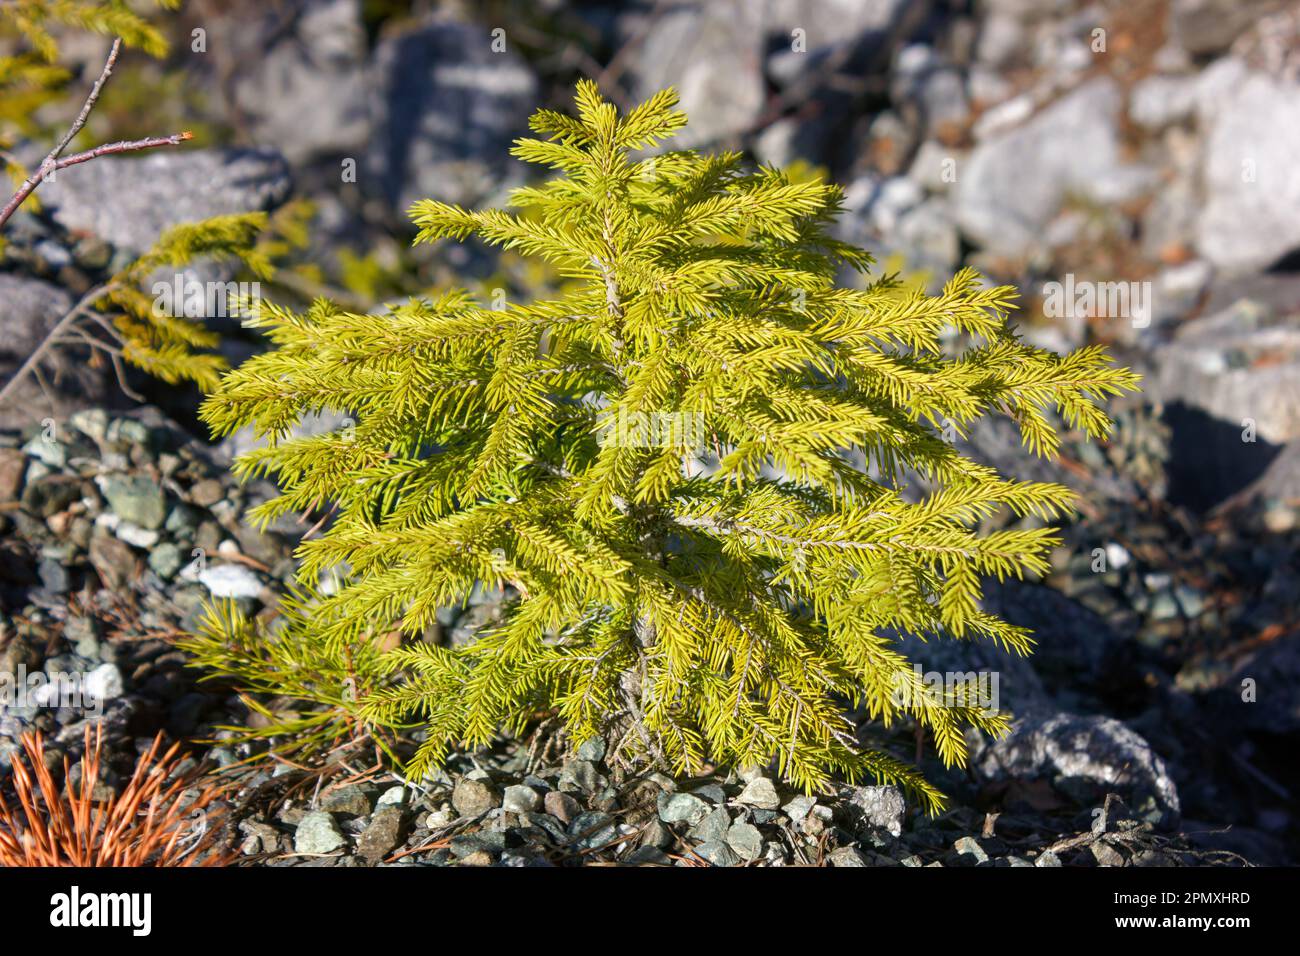 Picea orientalis. A young spruce tree on a rocky mountain slope close-up. Stock Photo